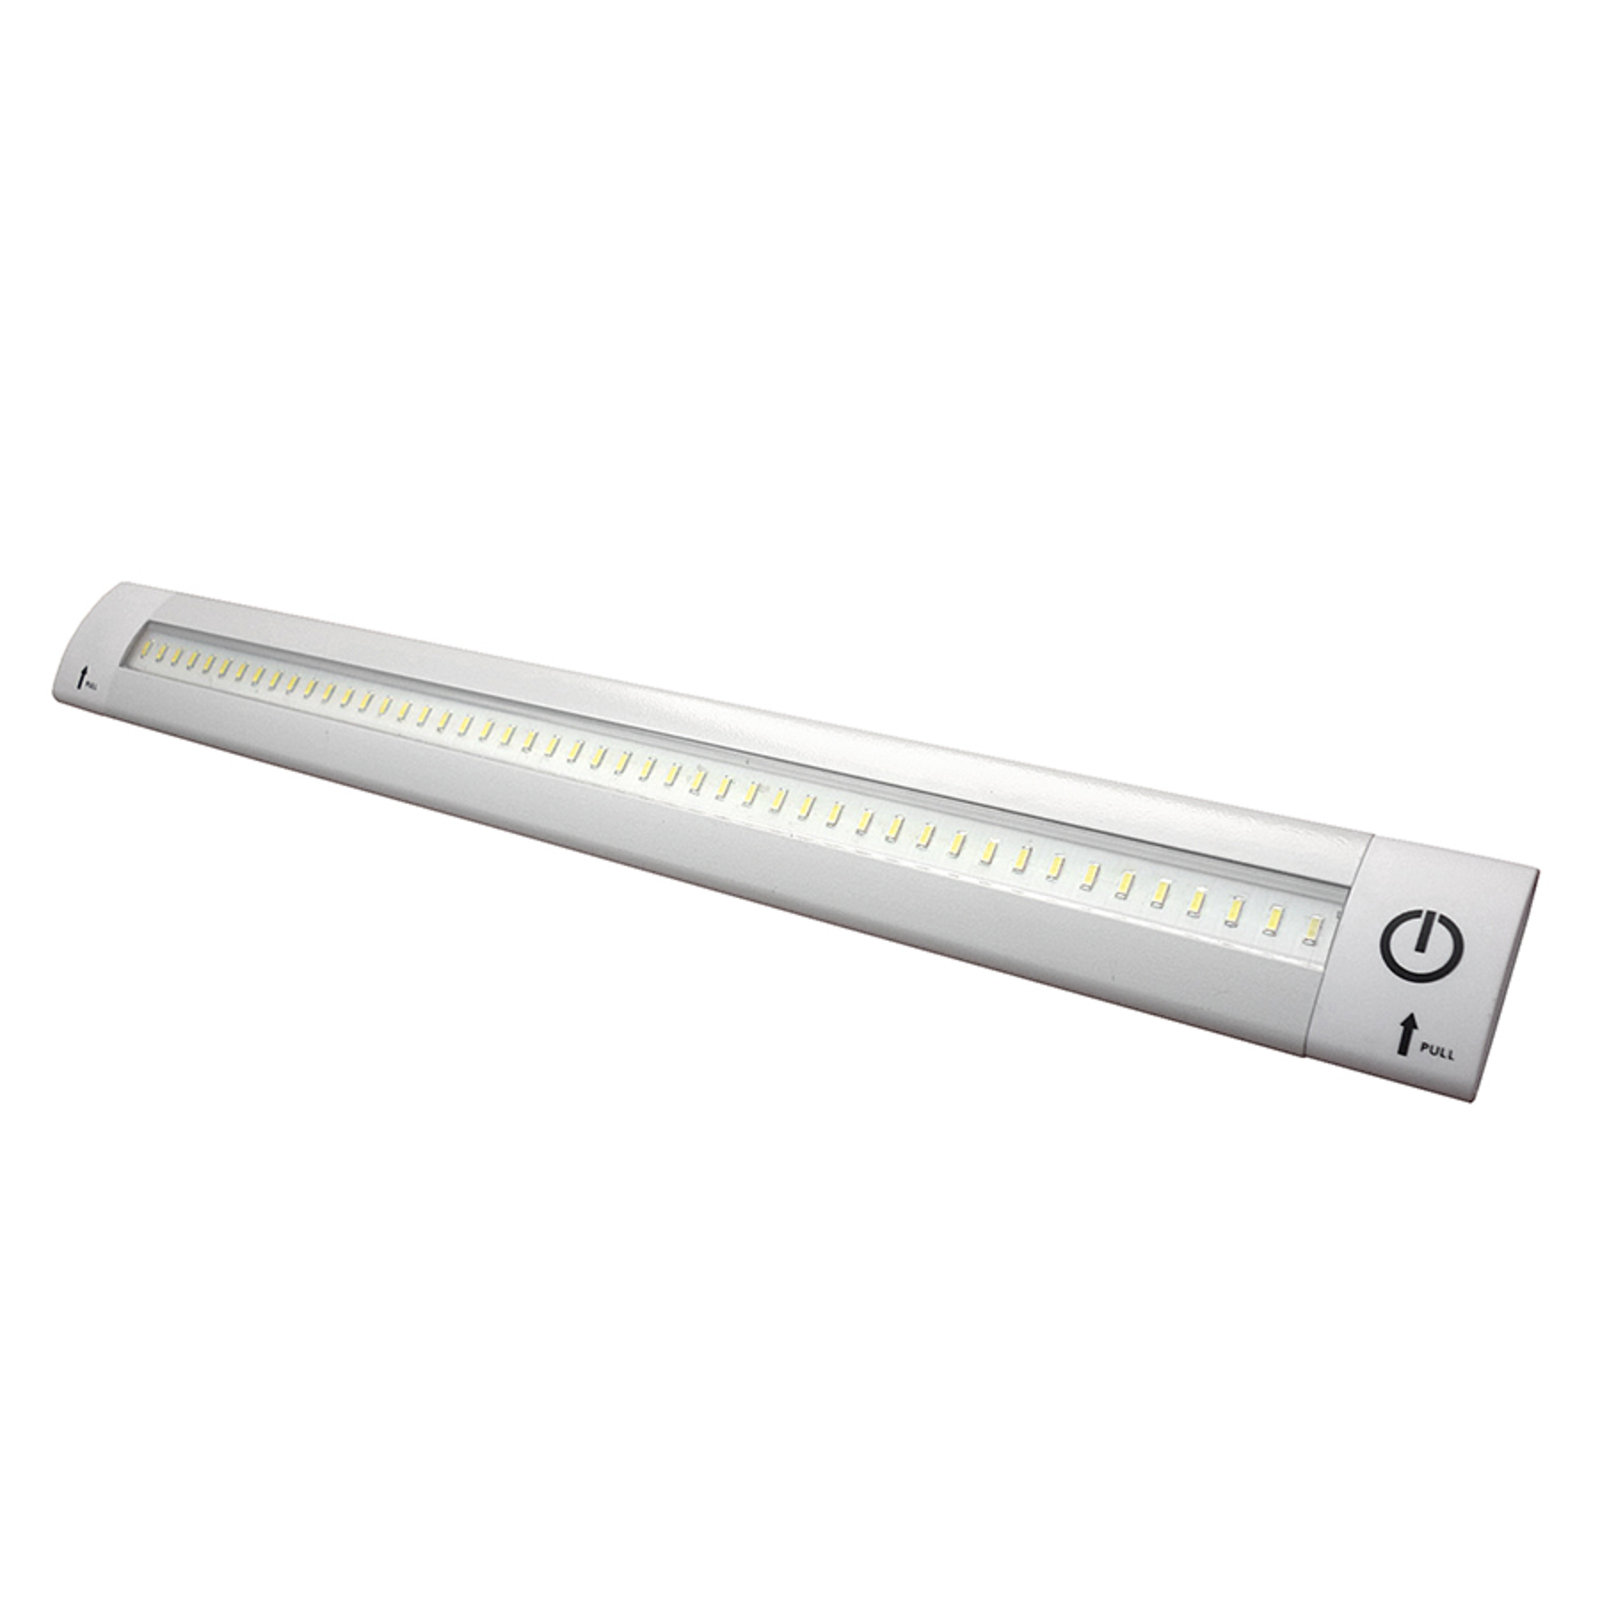 Lampada sottopensile LED 5W Galway 6690 TD